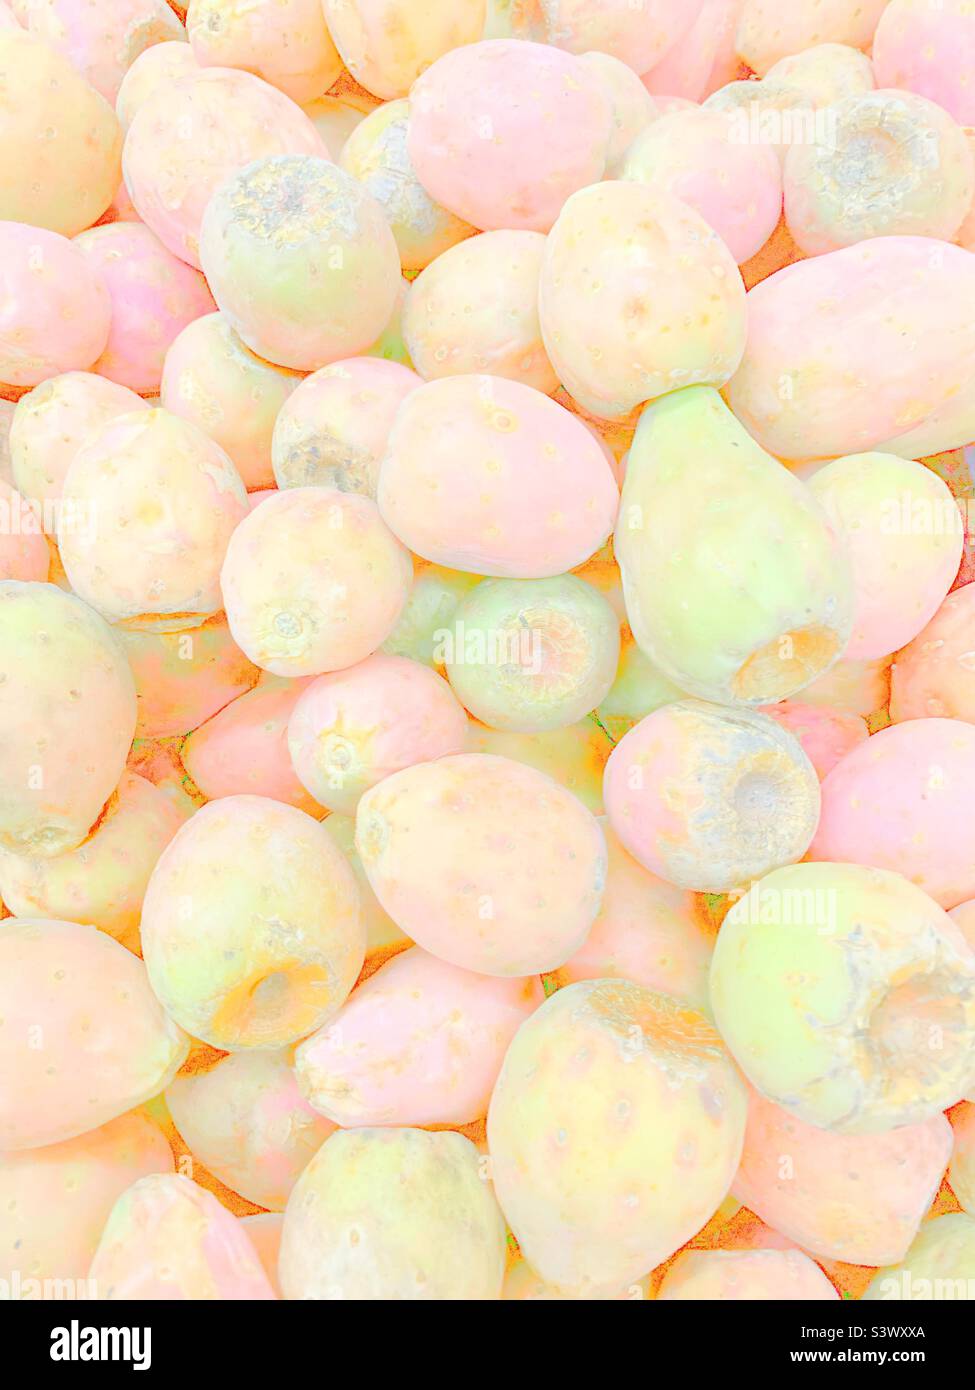 Faded photograph of cactus fruit as fresh produce. Stock Photo